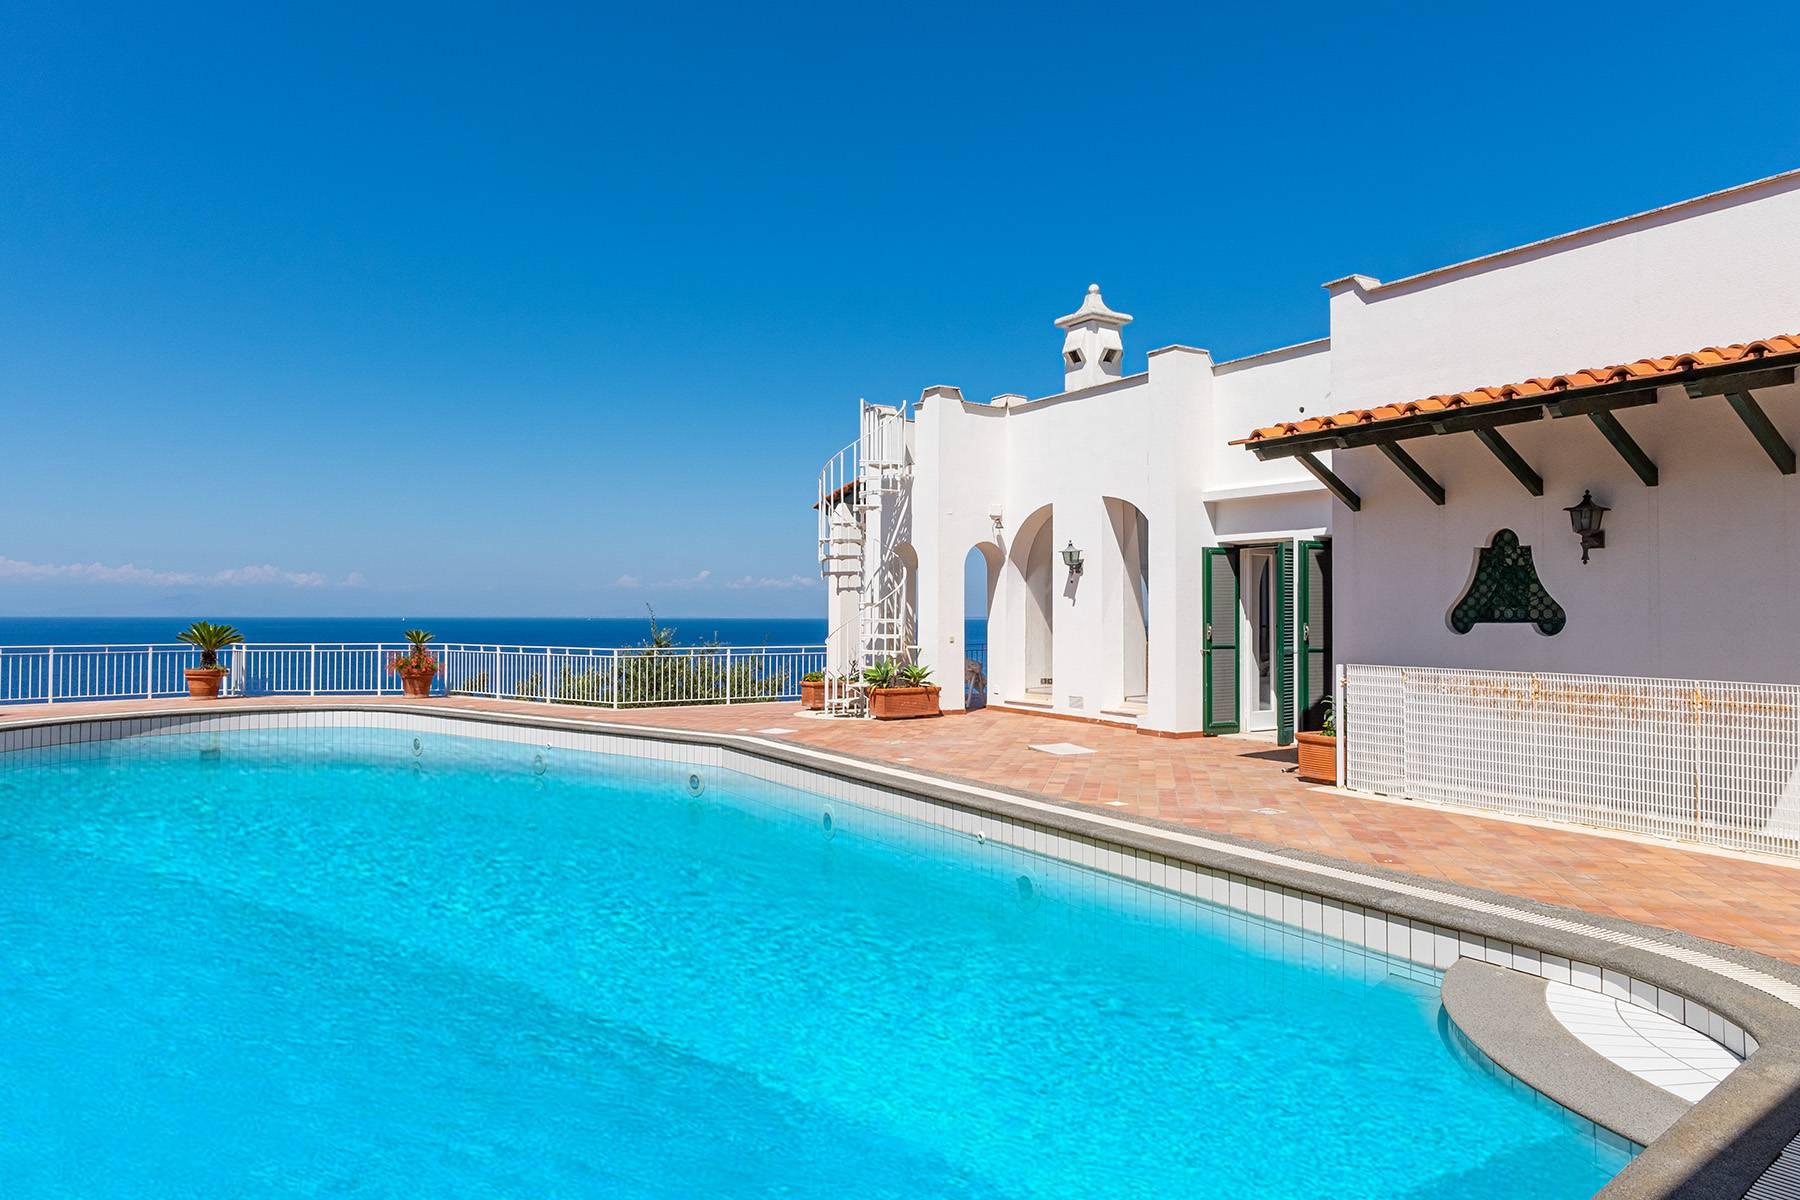 Mediterranean Villa pied dans l'eau with pool and private access to the sea - 11